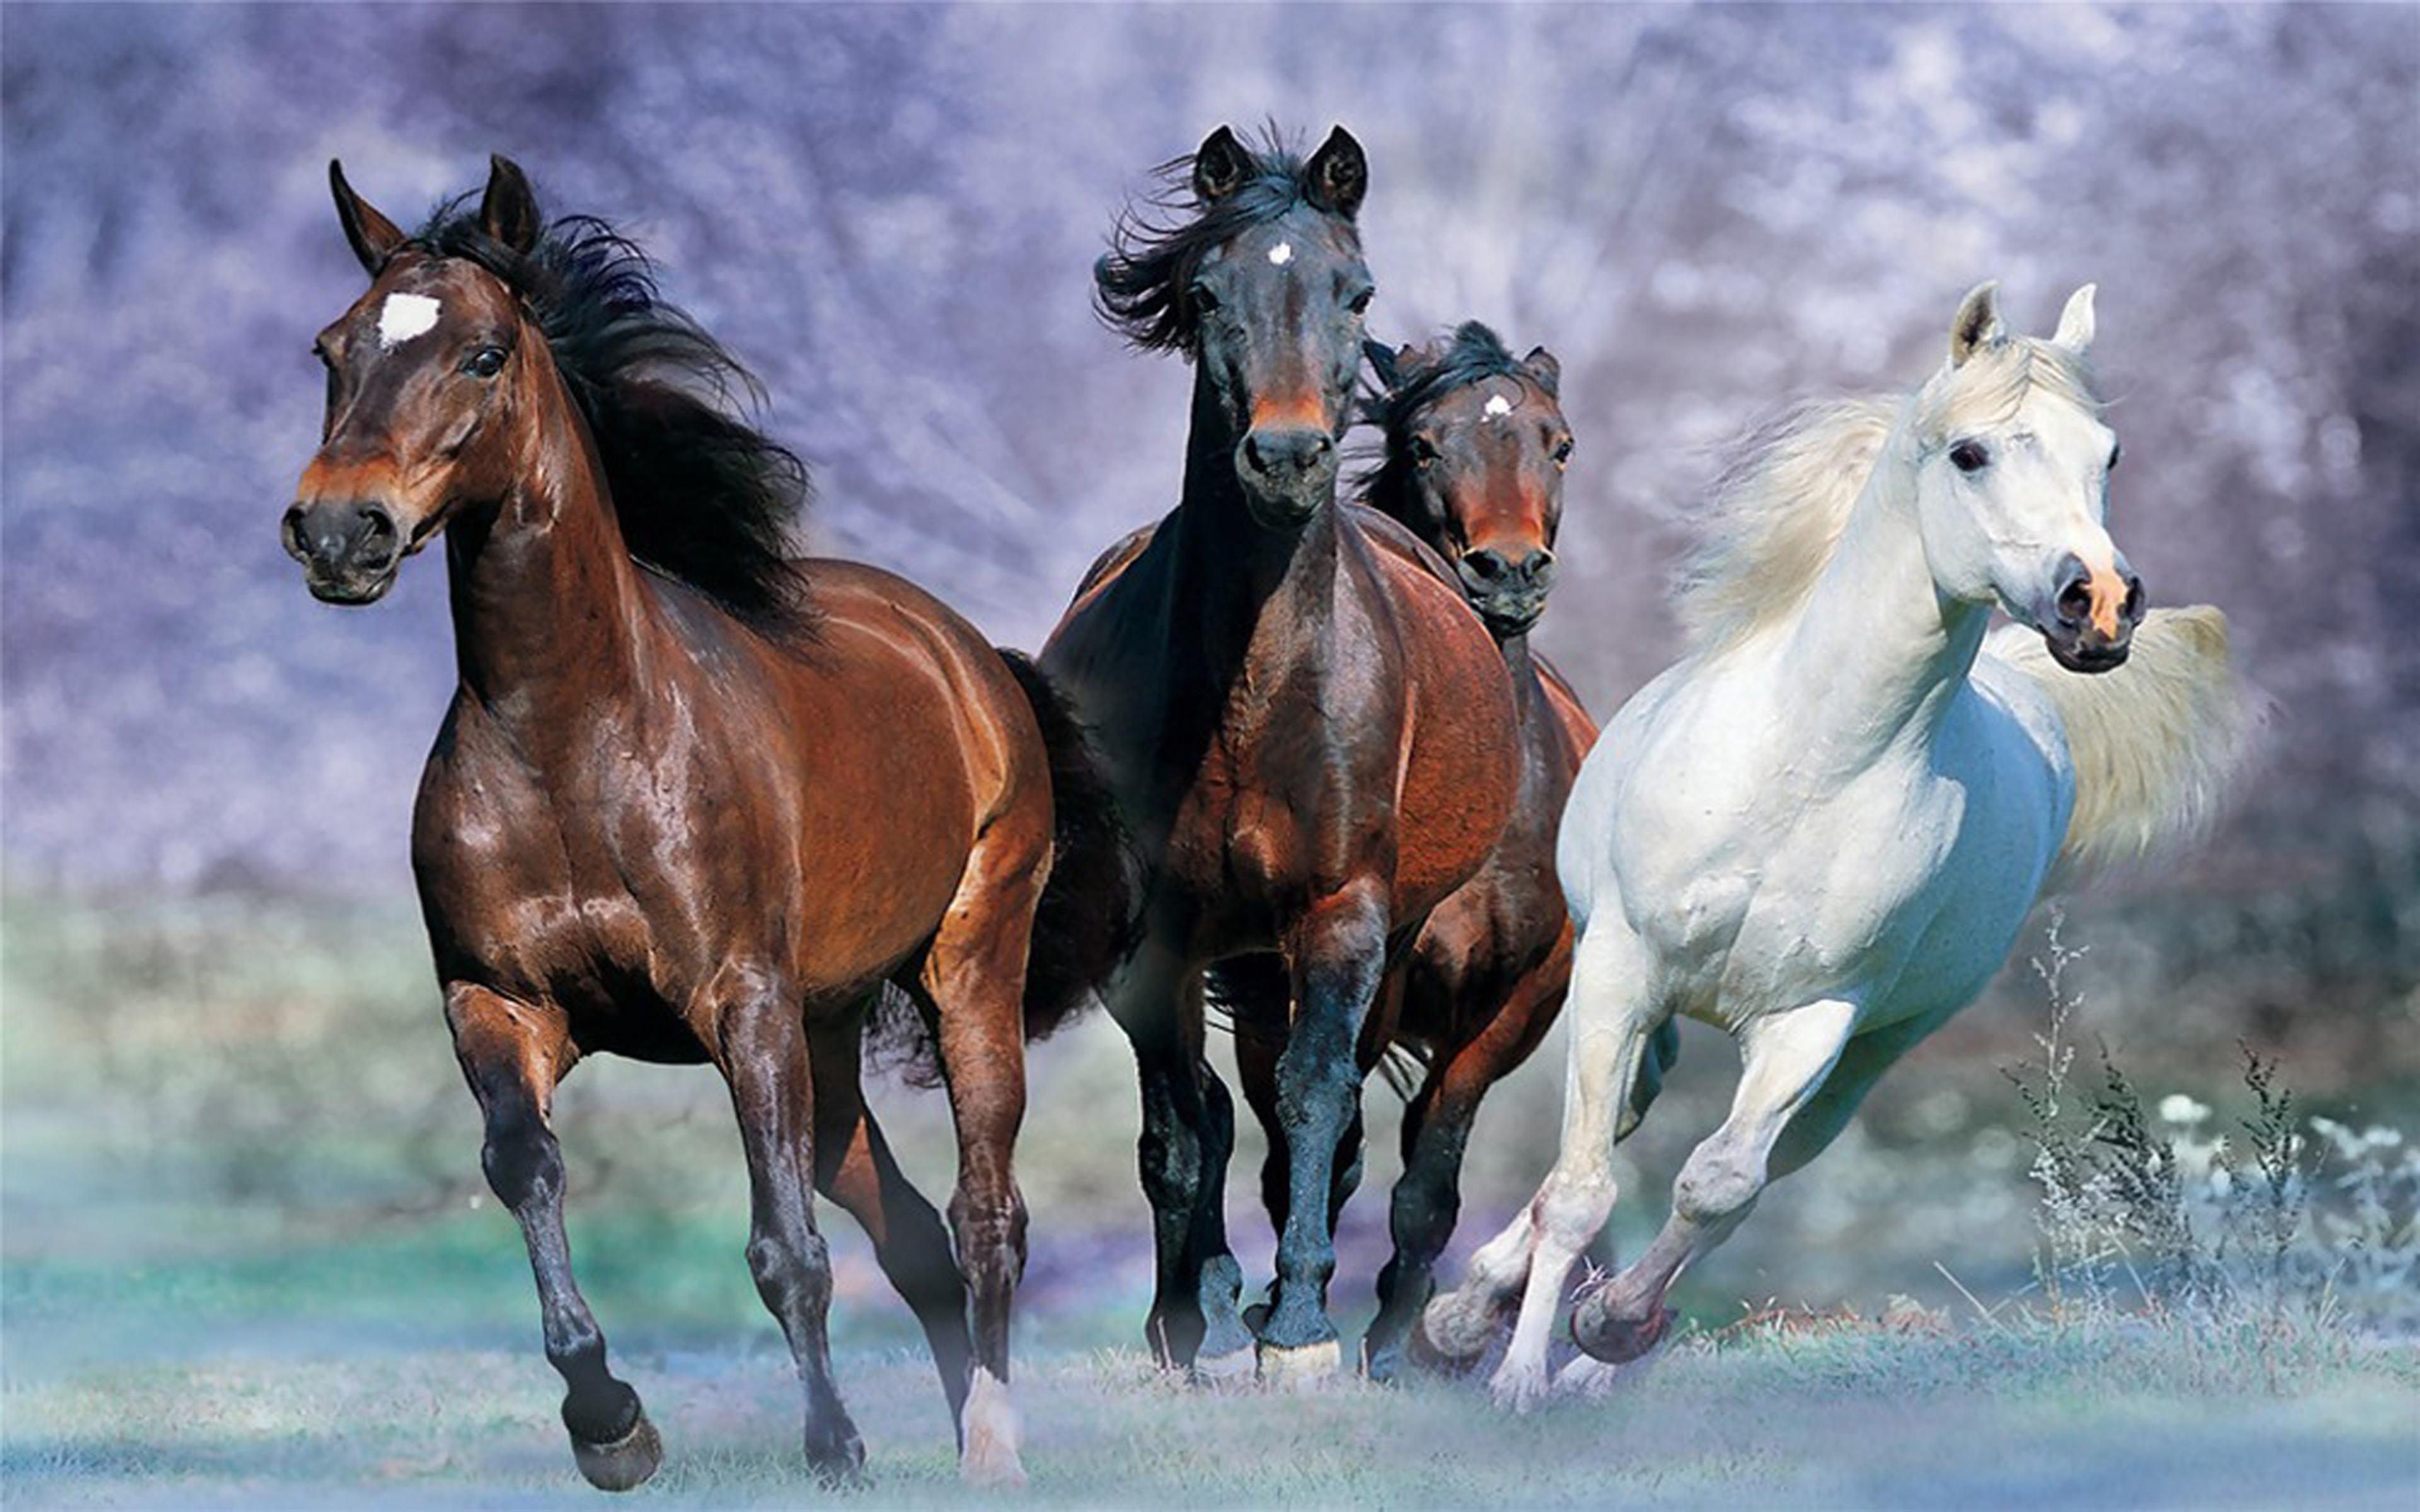 Galloping Horse Desktop Background Images Widescreen : Wallpapers13.com